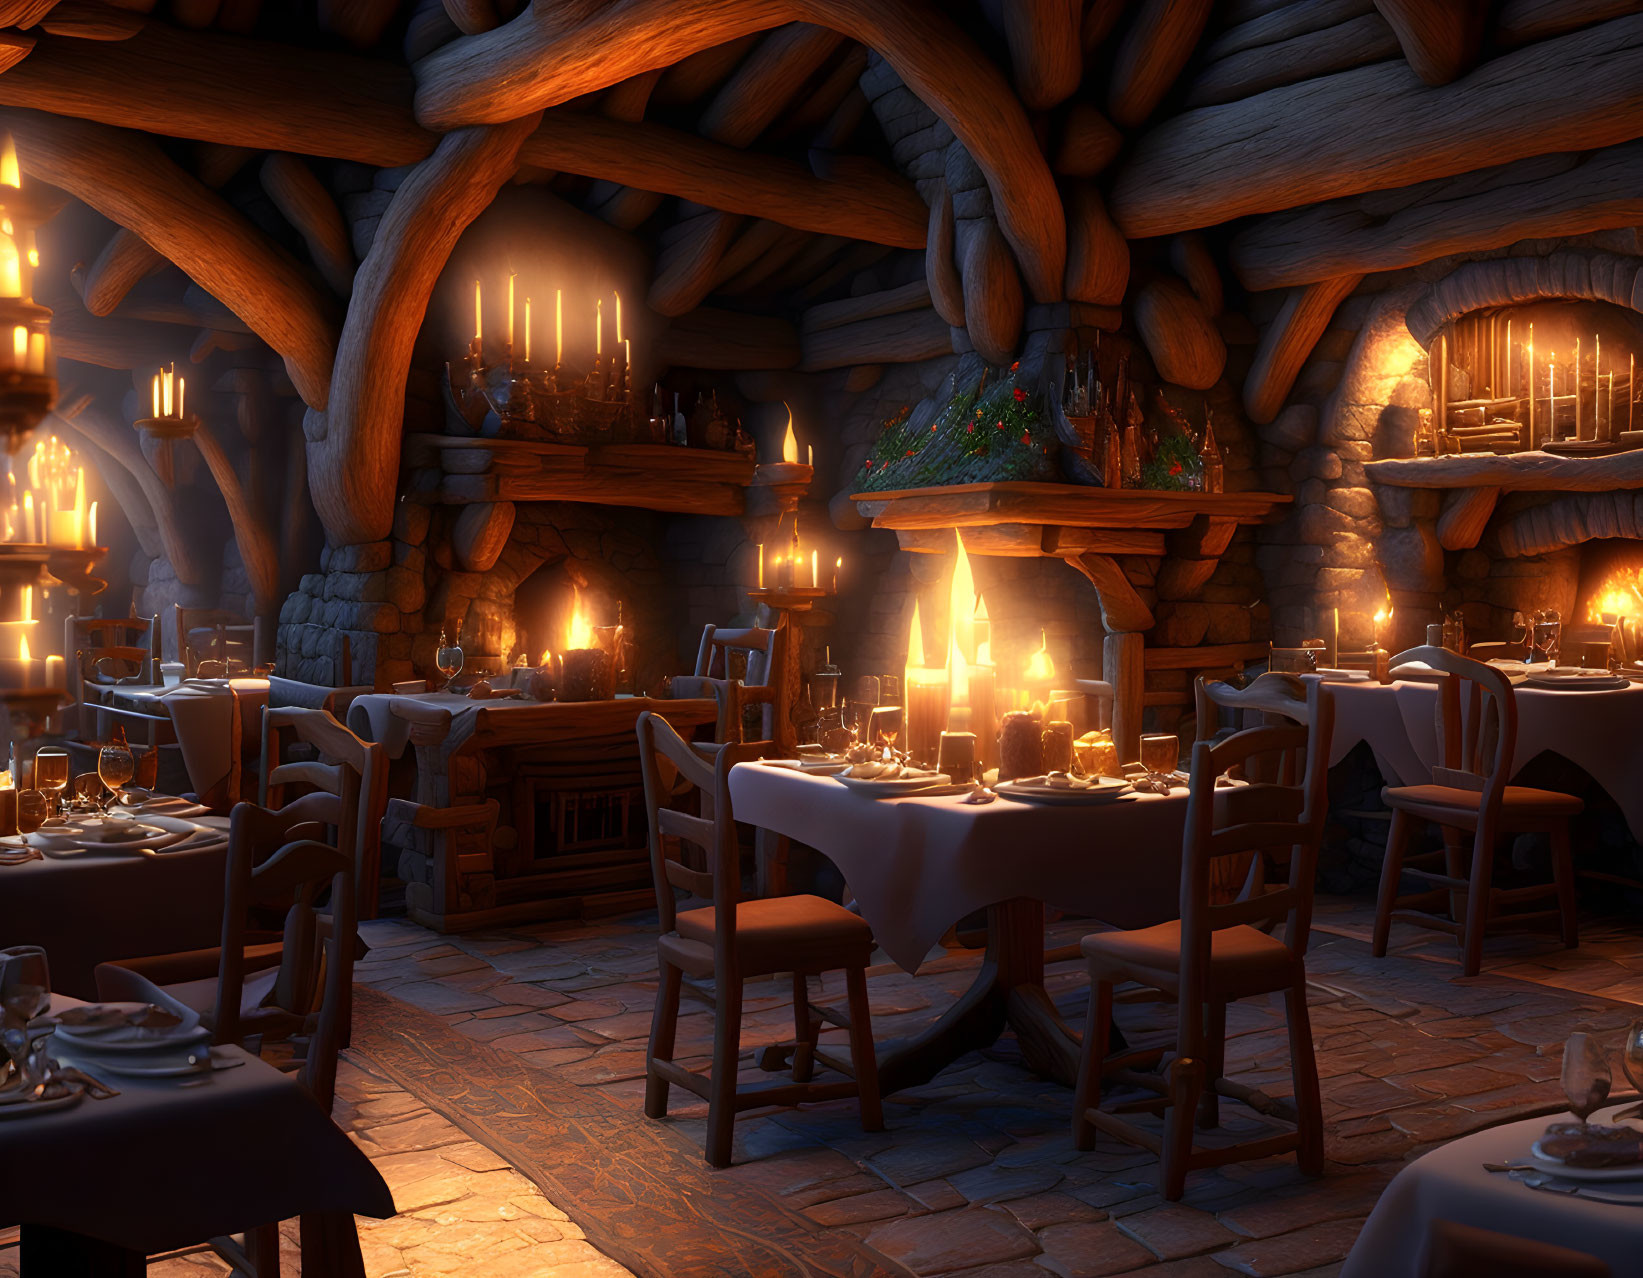 Medieval tavern interior with warm candlelight and fireplace ambiance